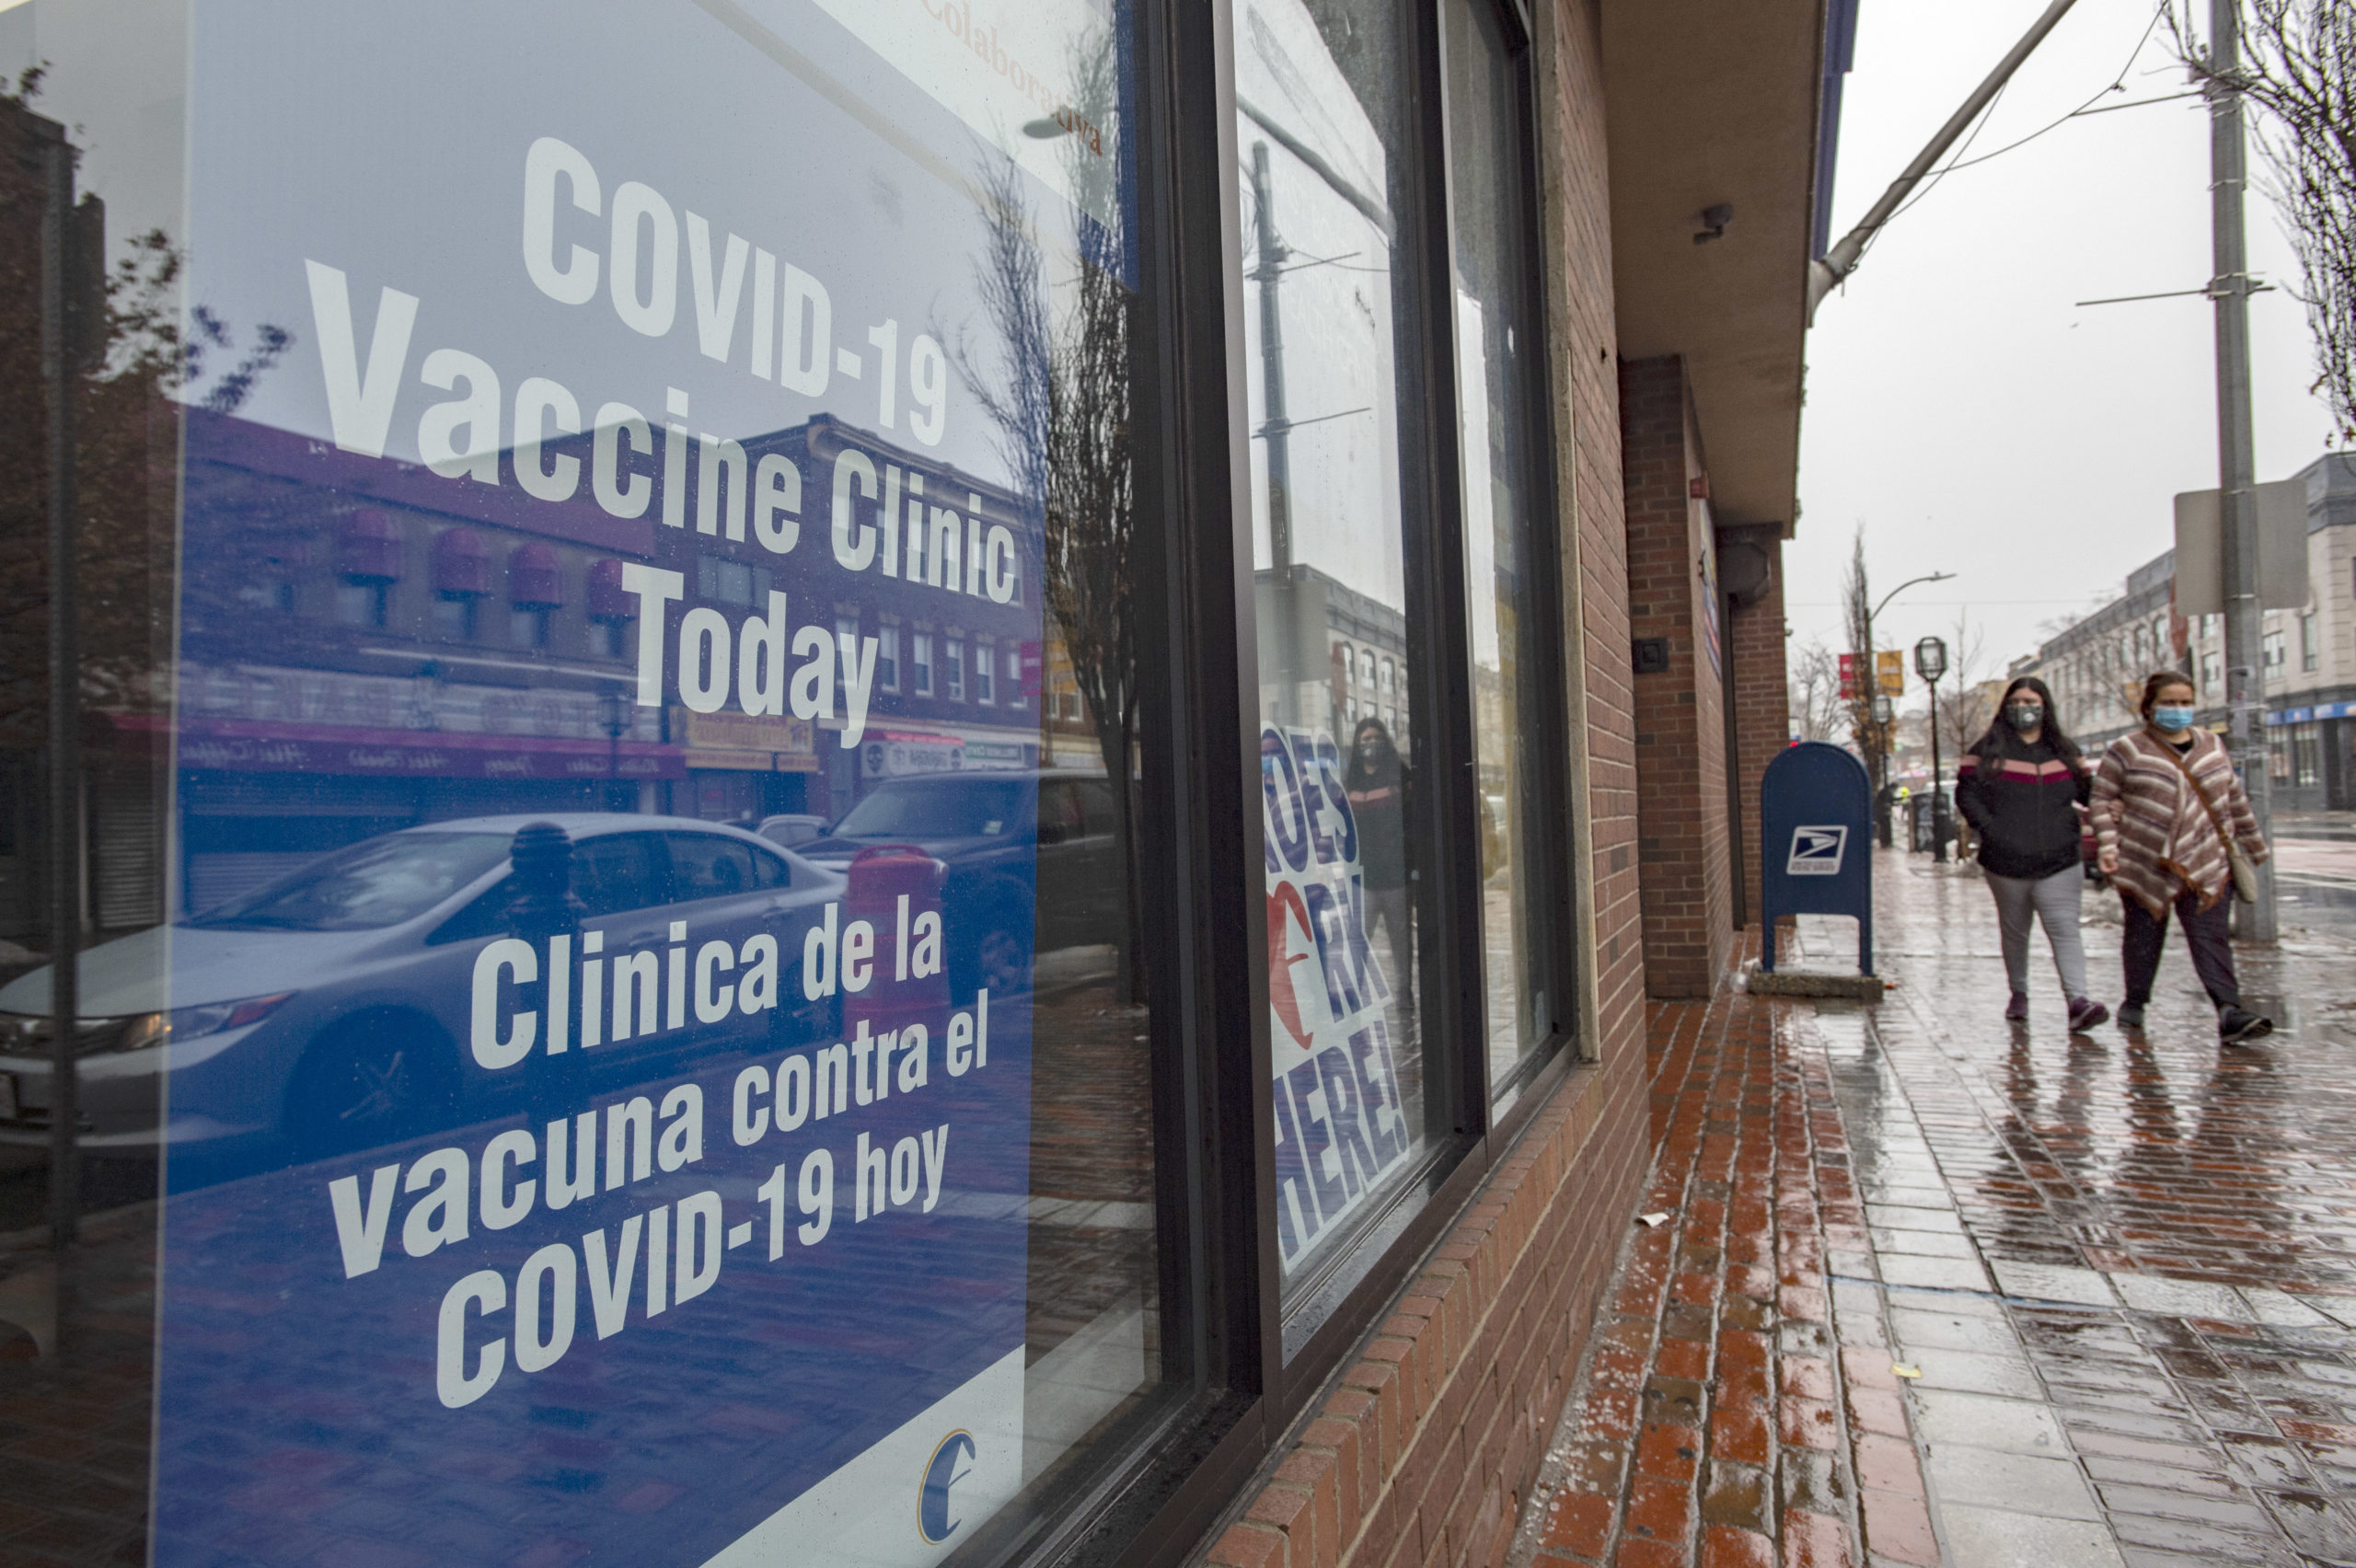 Signs in multiple languages let the public know they can get inoculated here at La Colaborativa in Chelsea, Massachusetts on February 16, 2021.  (Photo by JOSEPH PREZIOSO/AFP via Getty Images)